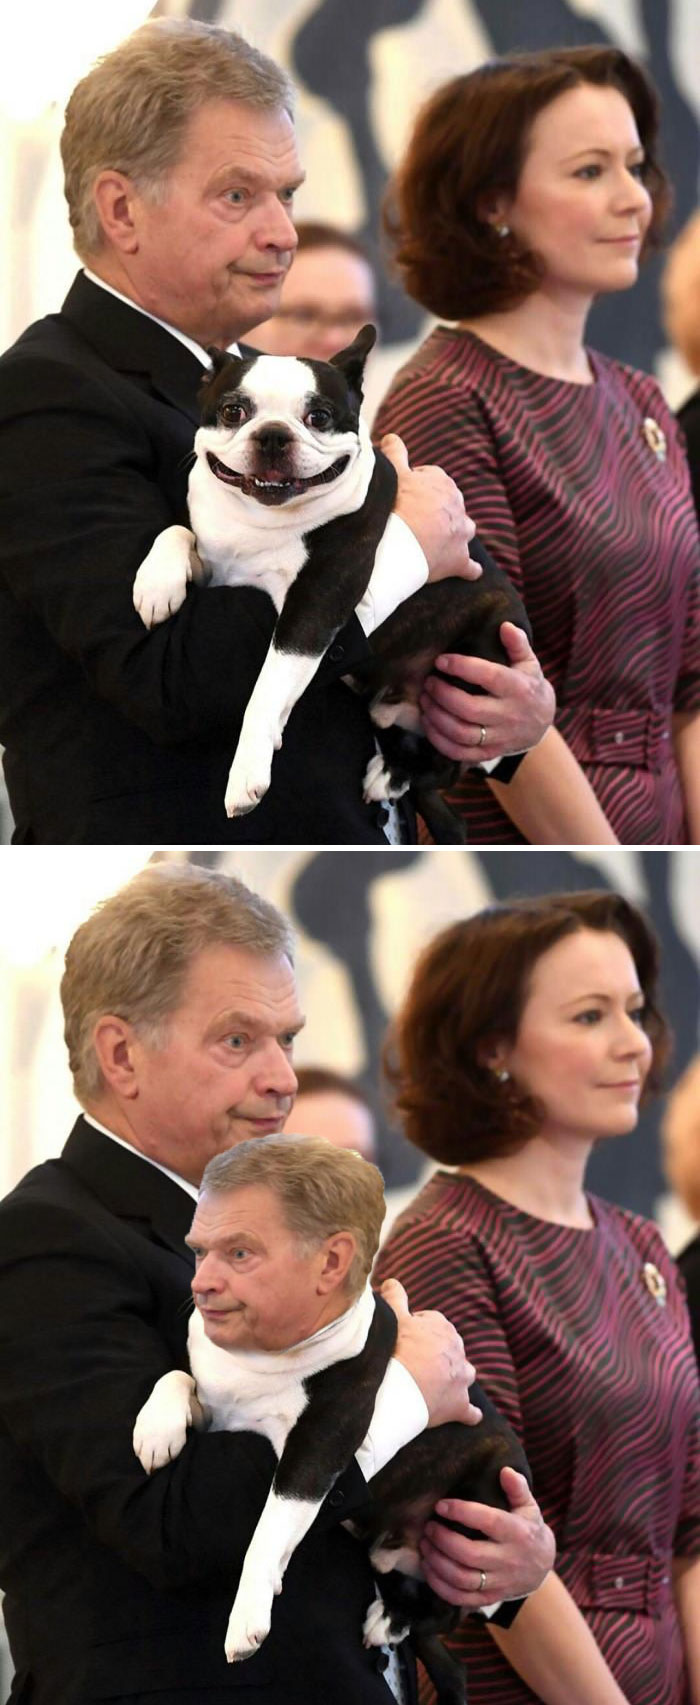 The Finnish President And His Dog